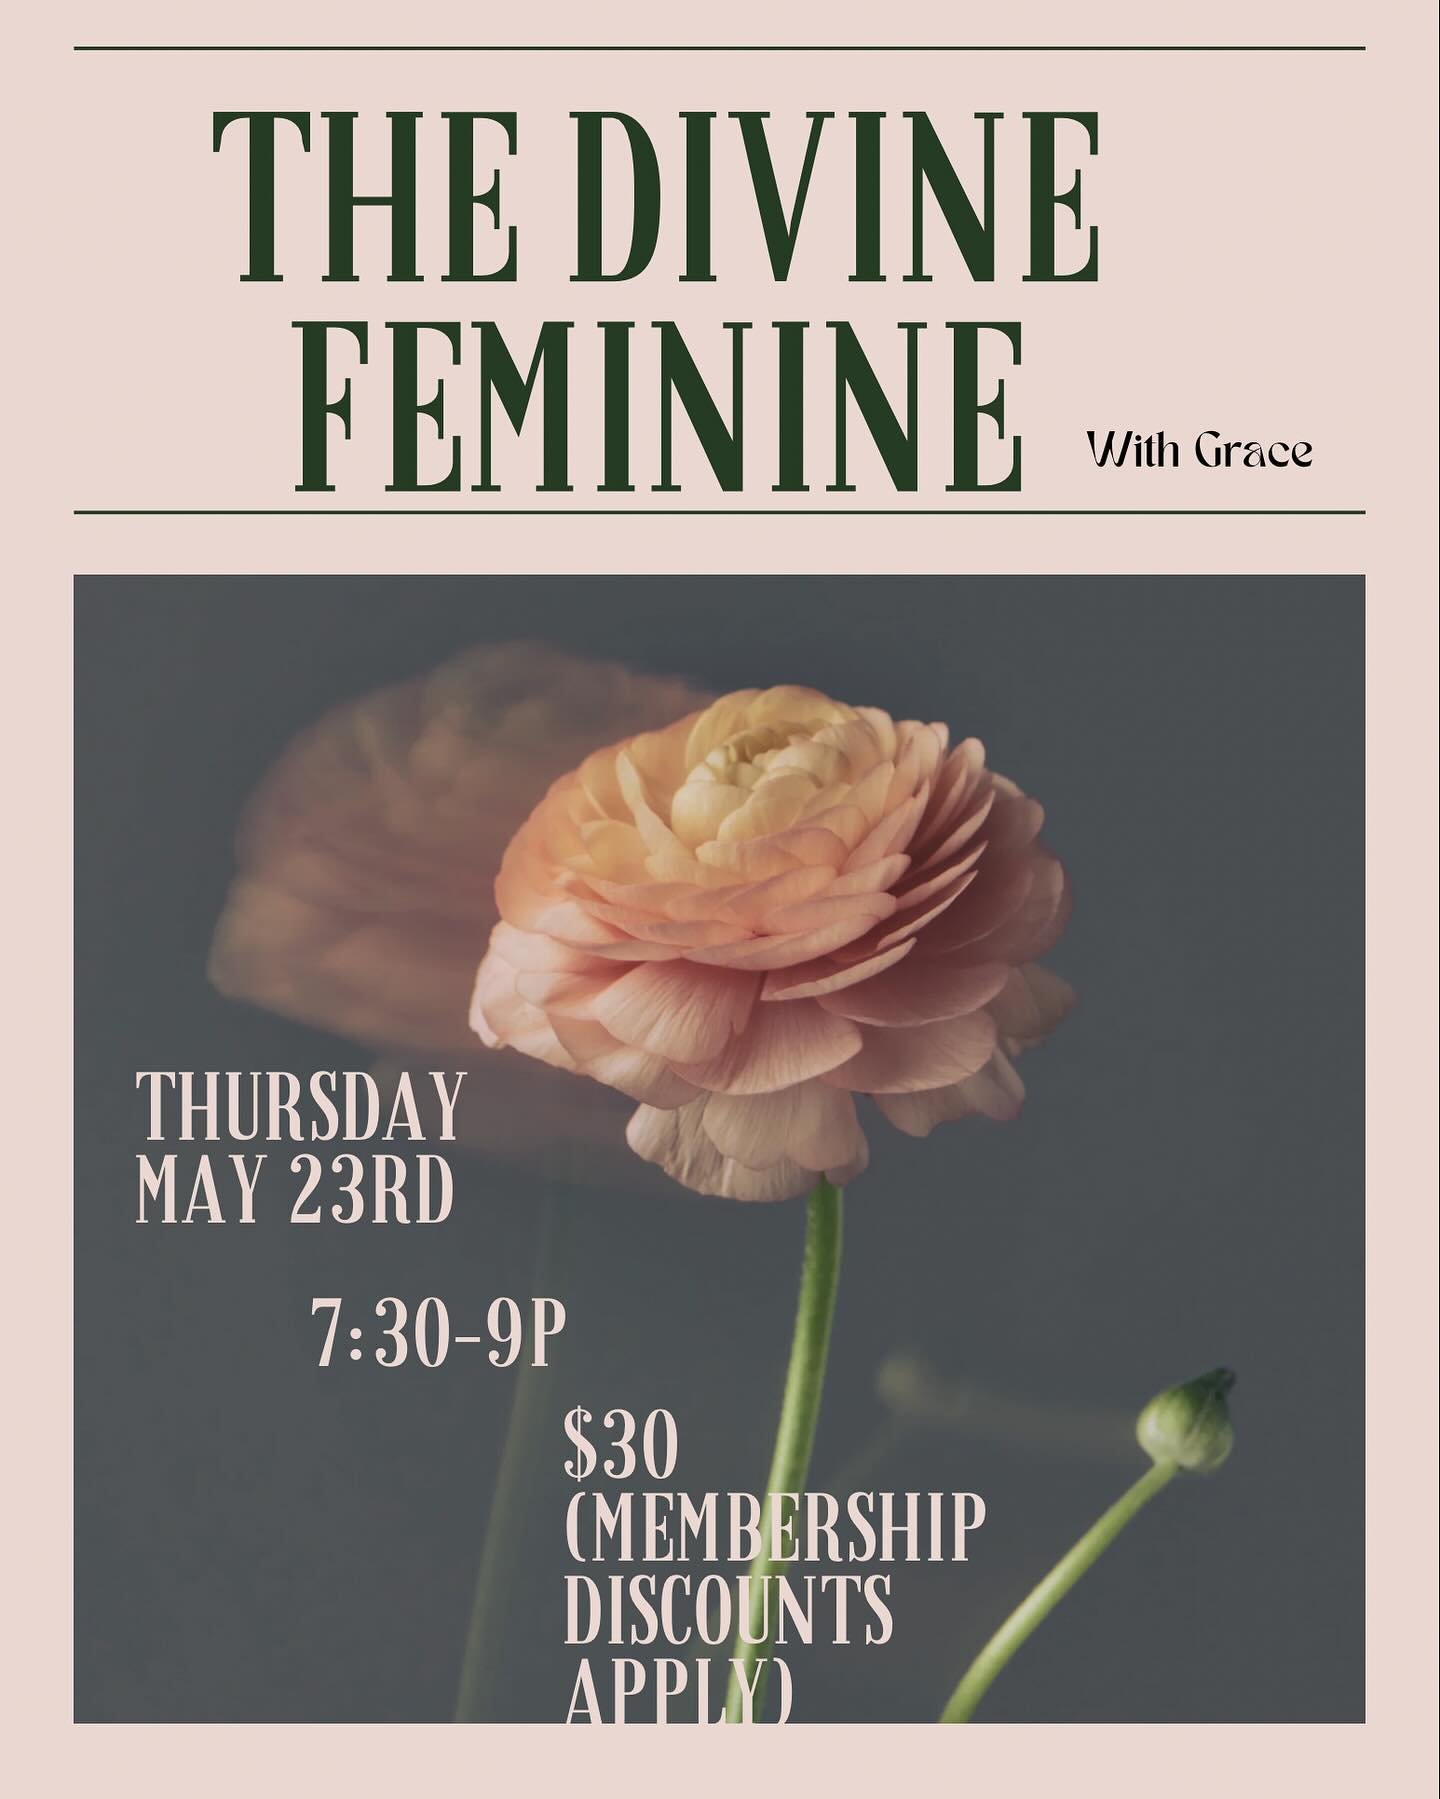 Join Grace next Thursday, May 23rd from 7:30-9 at the studio for a 🥀 DIVINE FEMININE EVENING EXPERIENCE 🥀

🌸 Gentle yoga, moving meditation, mindful moments, mushroom elixir, reflection + C O N N E C T I O N ✨

🌸 $30 (Membership discounts apply!)